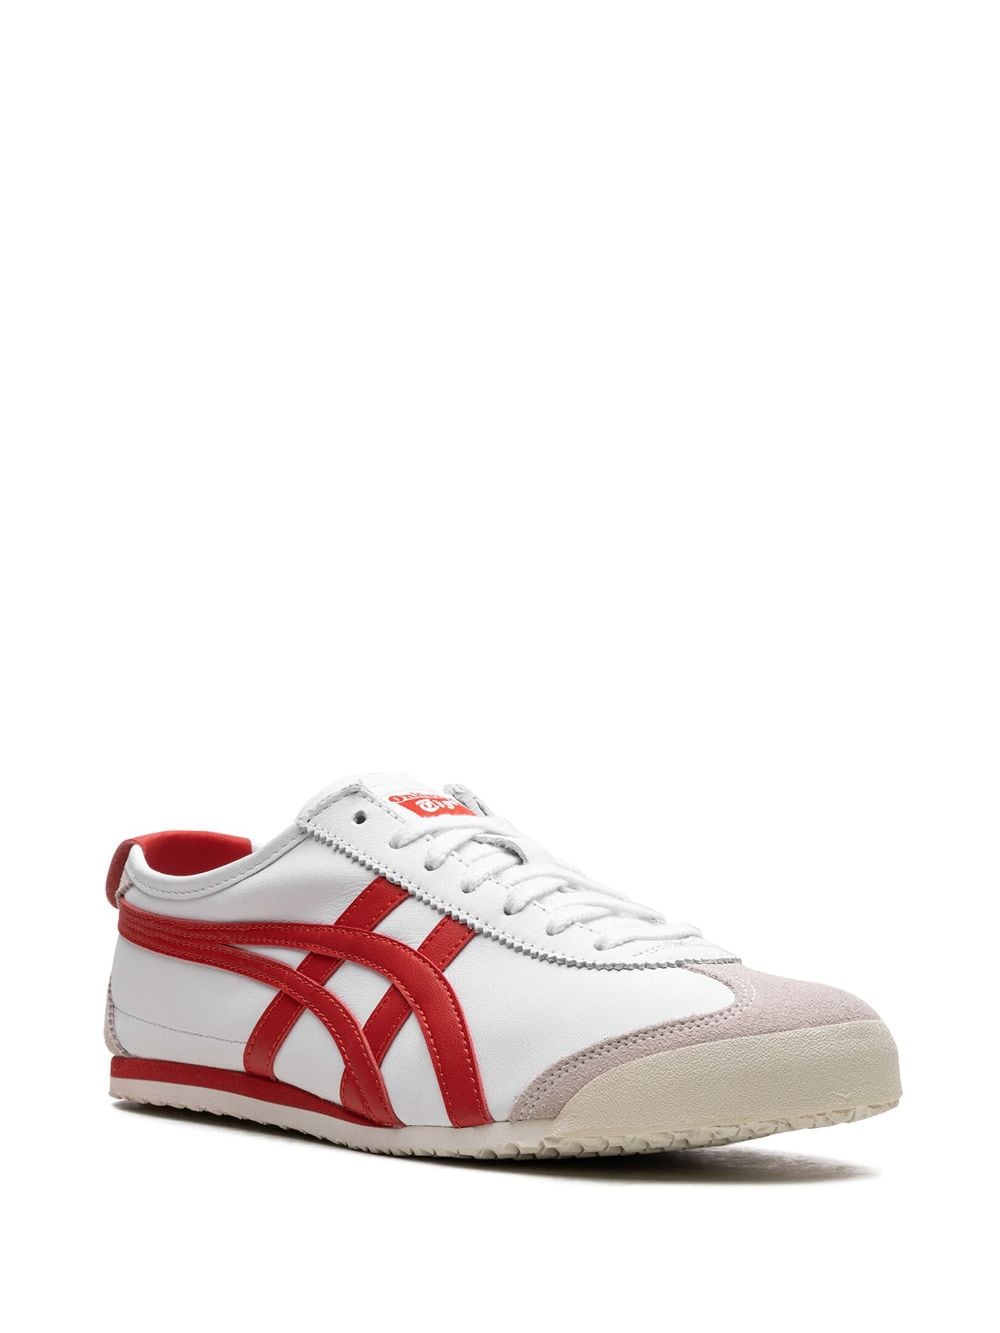 Shop Onitsuka Tiger Mexico 66 "white/red" Sneakers